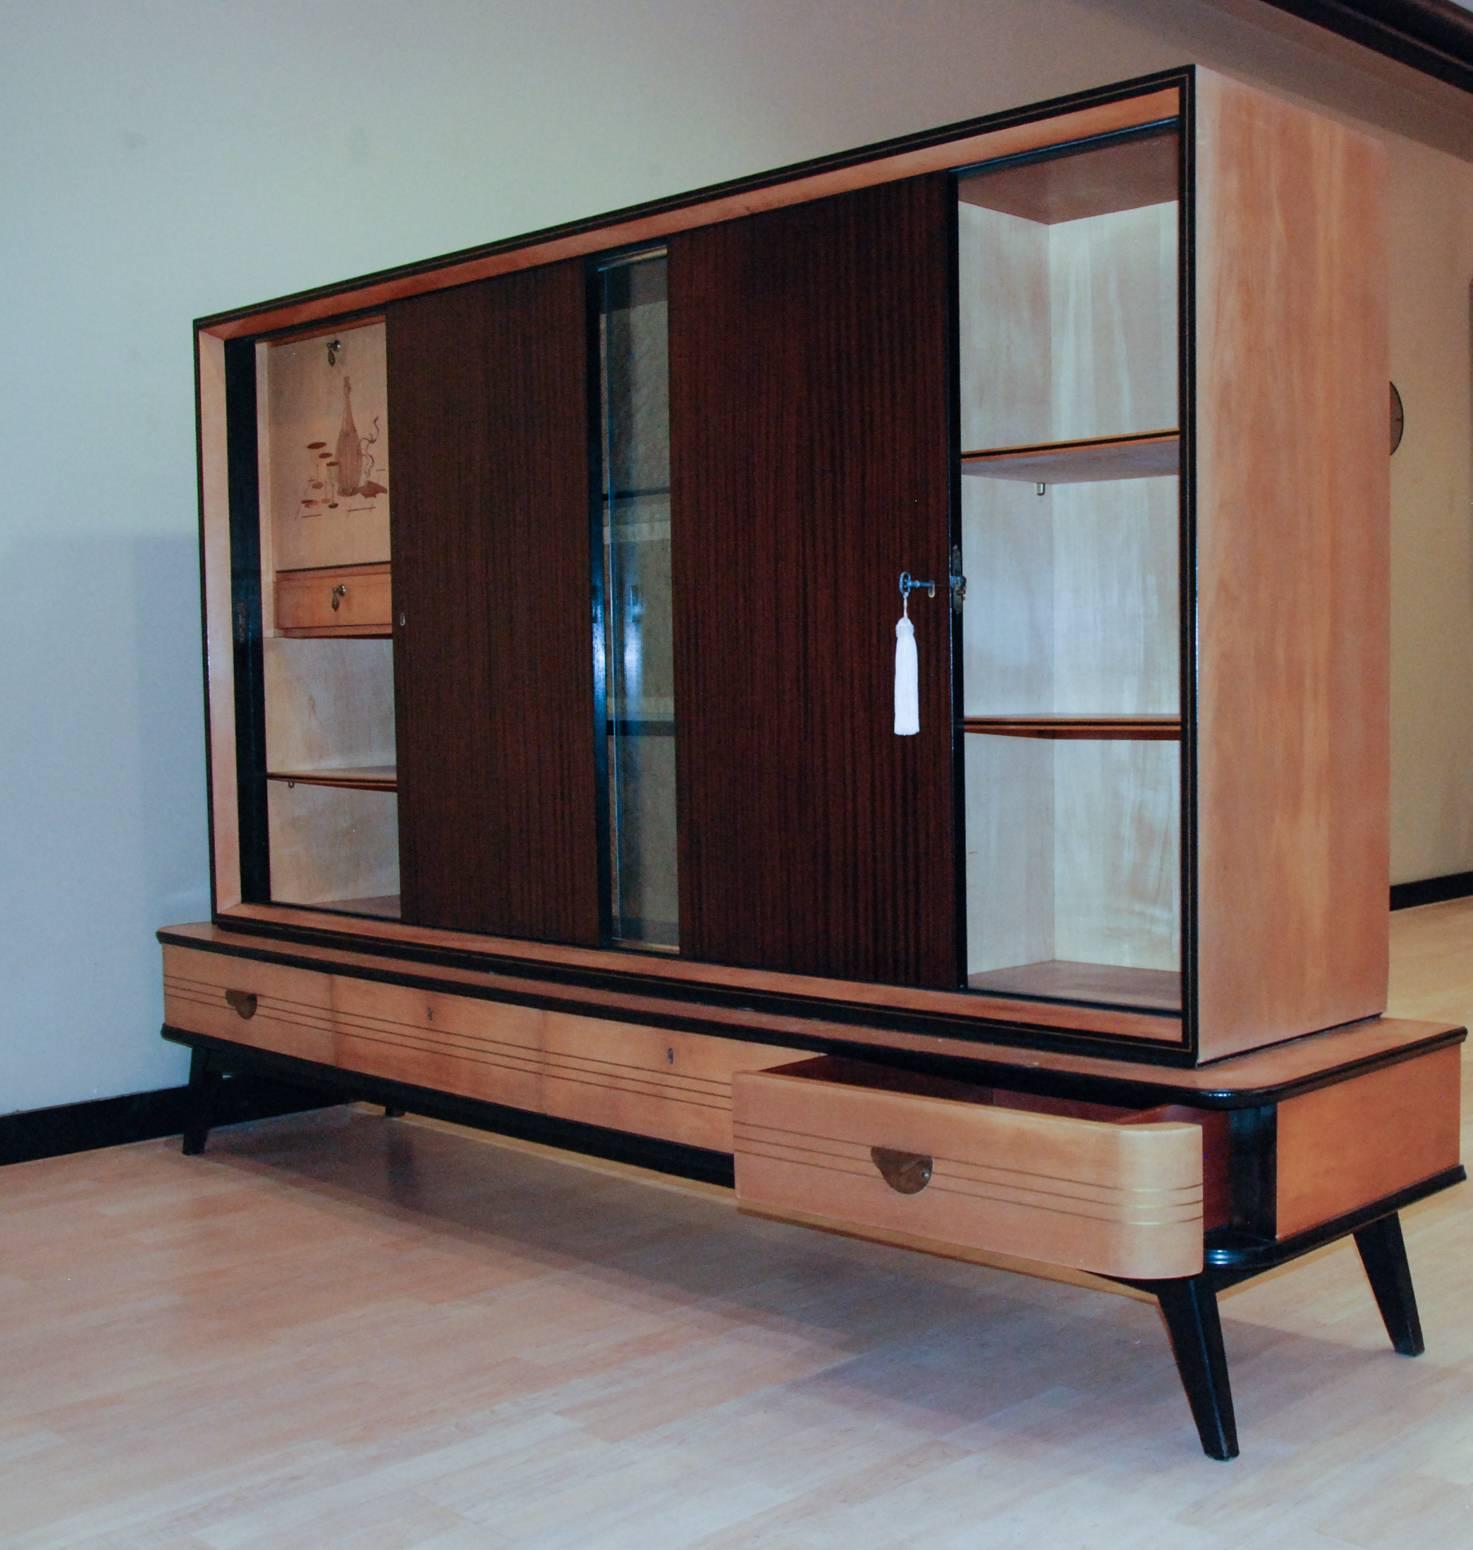 A fine German bar and display cabinet in various exotic woods with a marquetry still life design on the pull-down bar door. The interior is mirrored with a glass shelf and interior light. The unit separates into two sections for easier transport